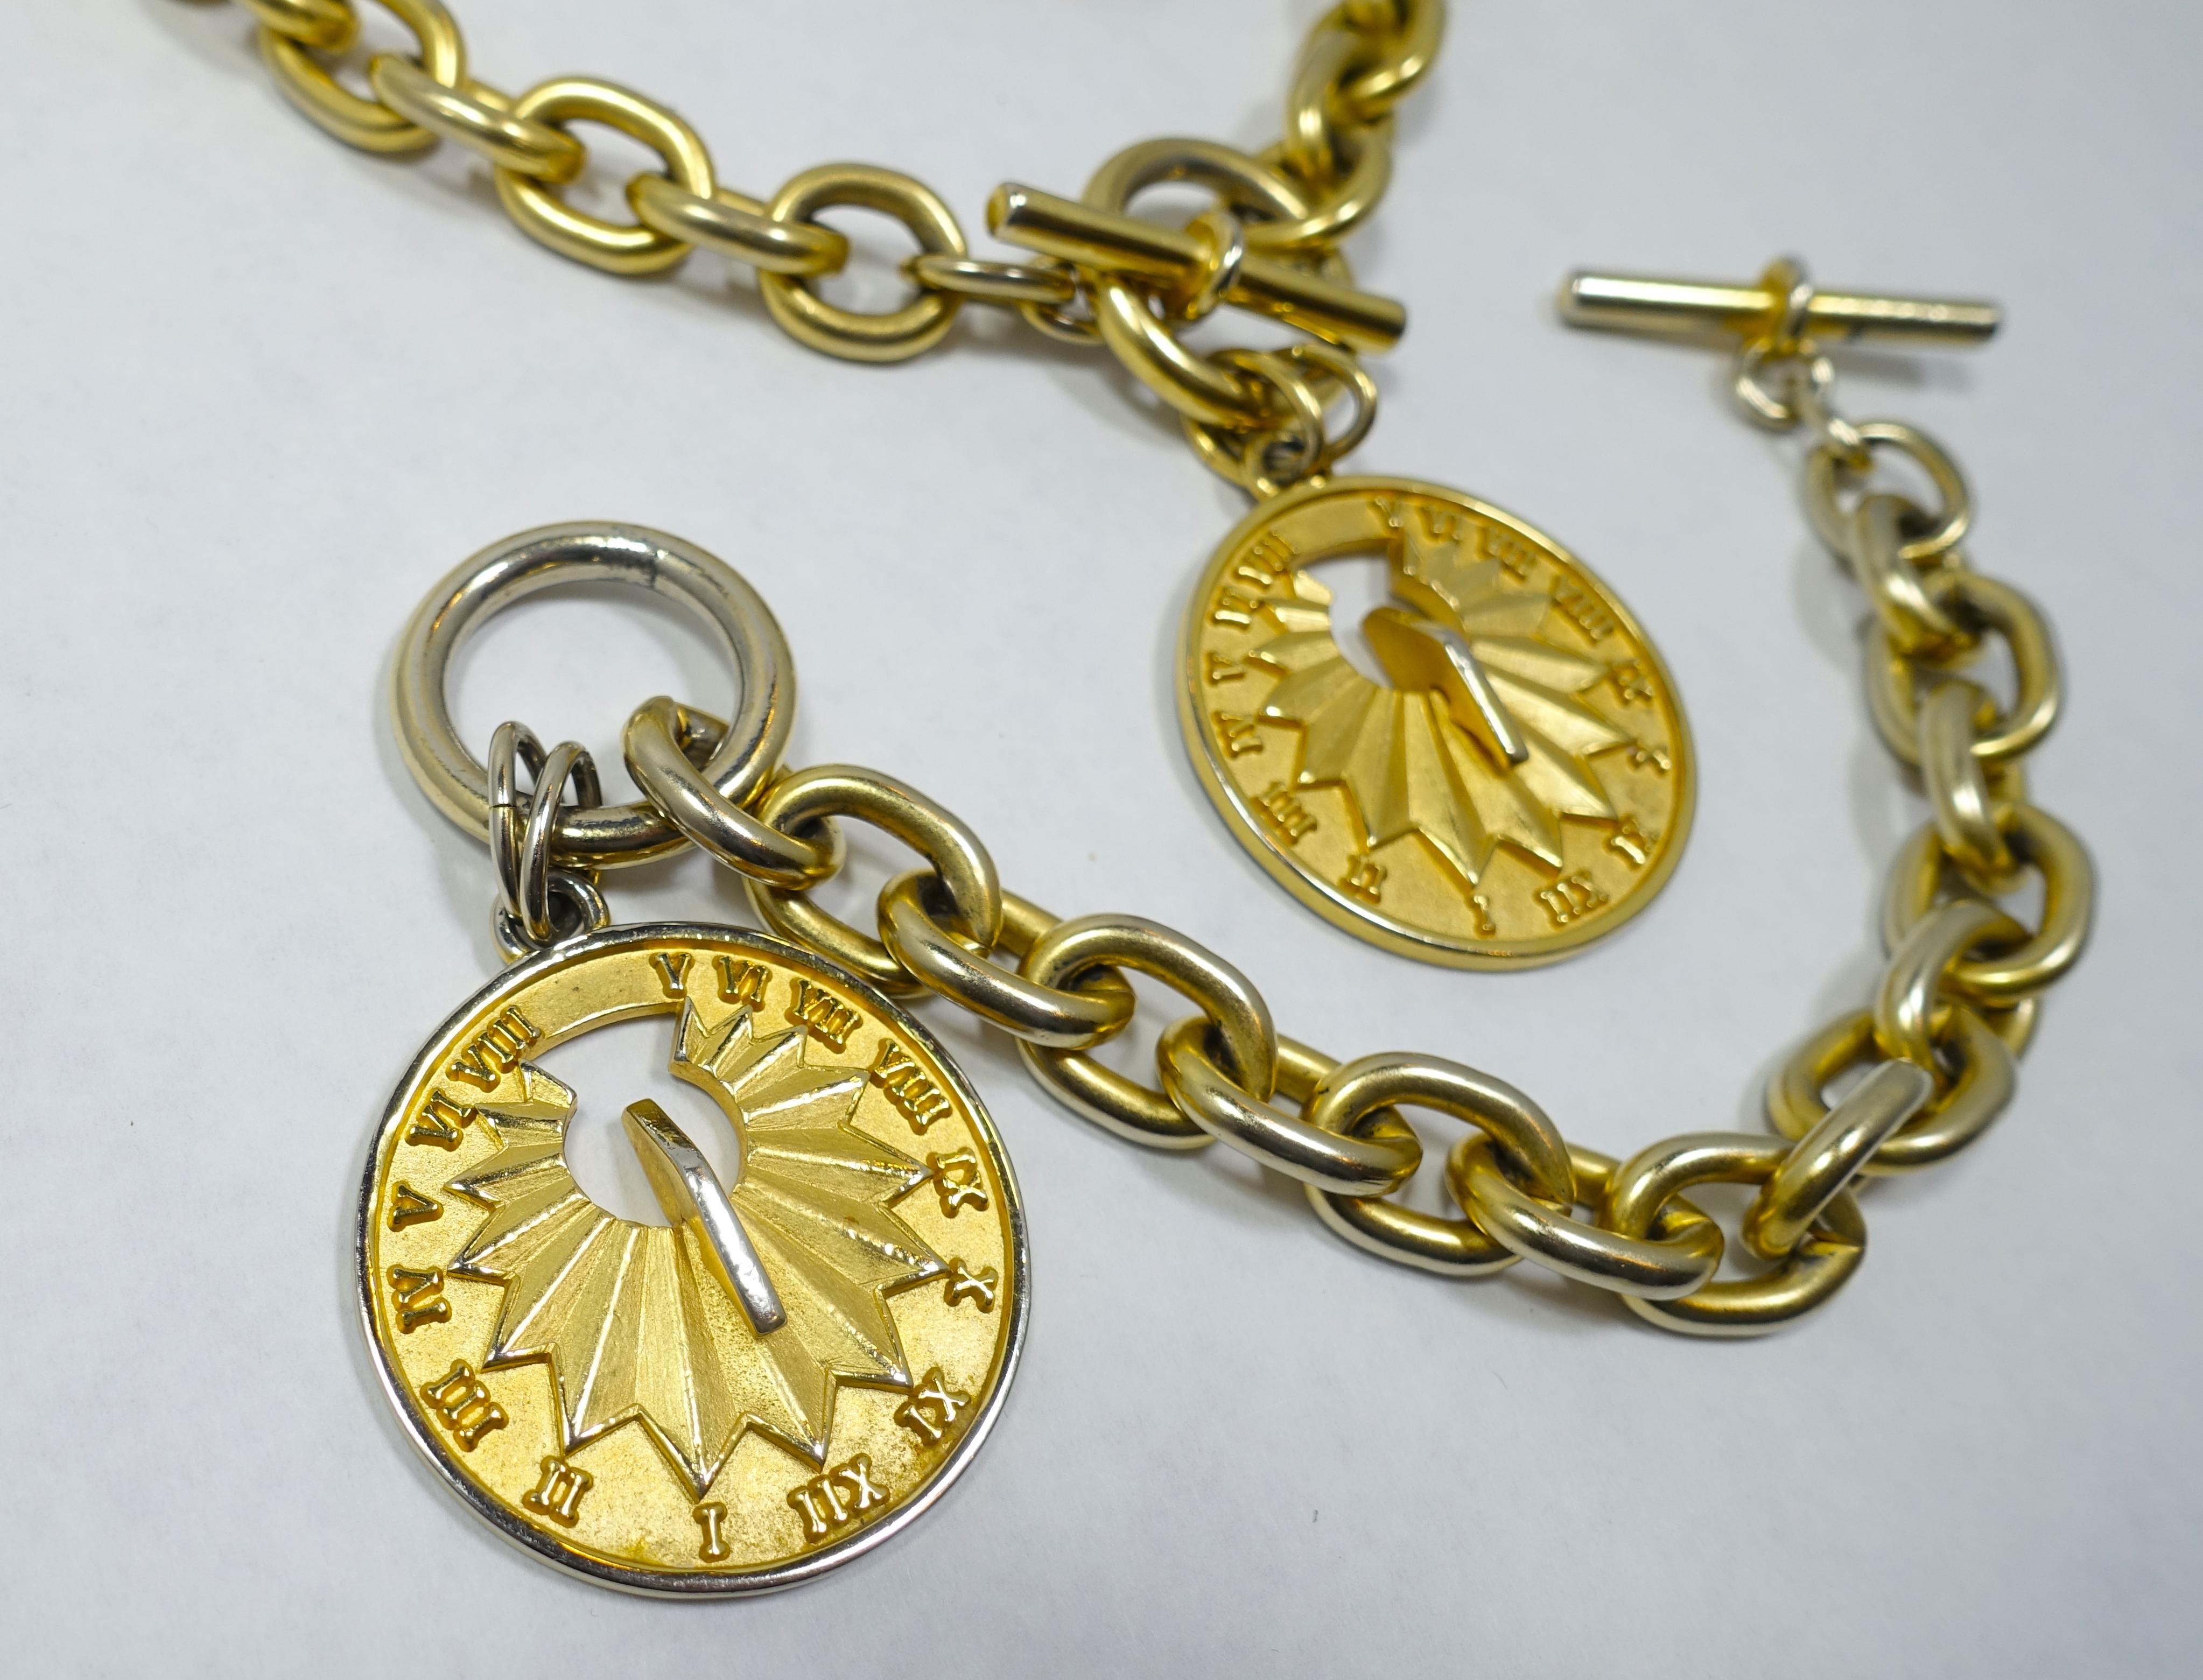 This is a 500 year commemorative Christopher Columbus vintage set designed by Erwin Pearl. It features a drop with a sundial on one side and “Columbus 1492-1992” on the other side … each drop measures 1-1/2” across.  The necklace measures 19-1/2” x